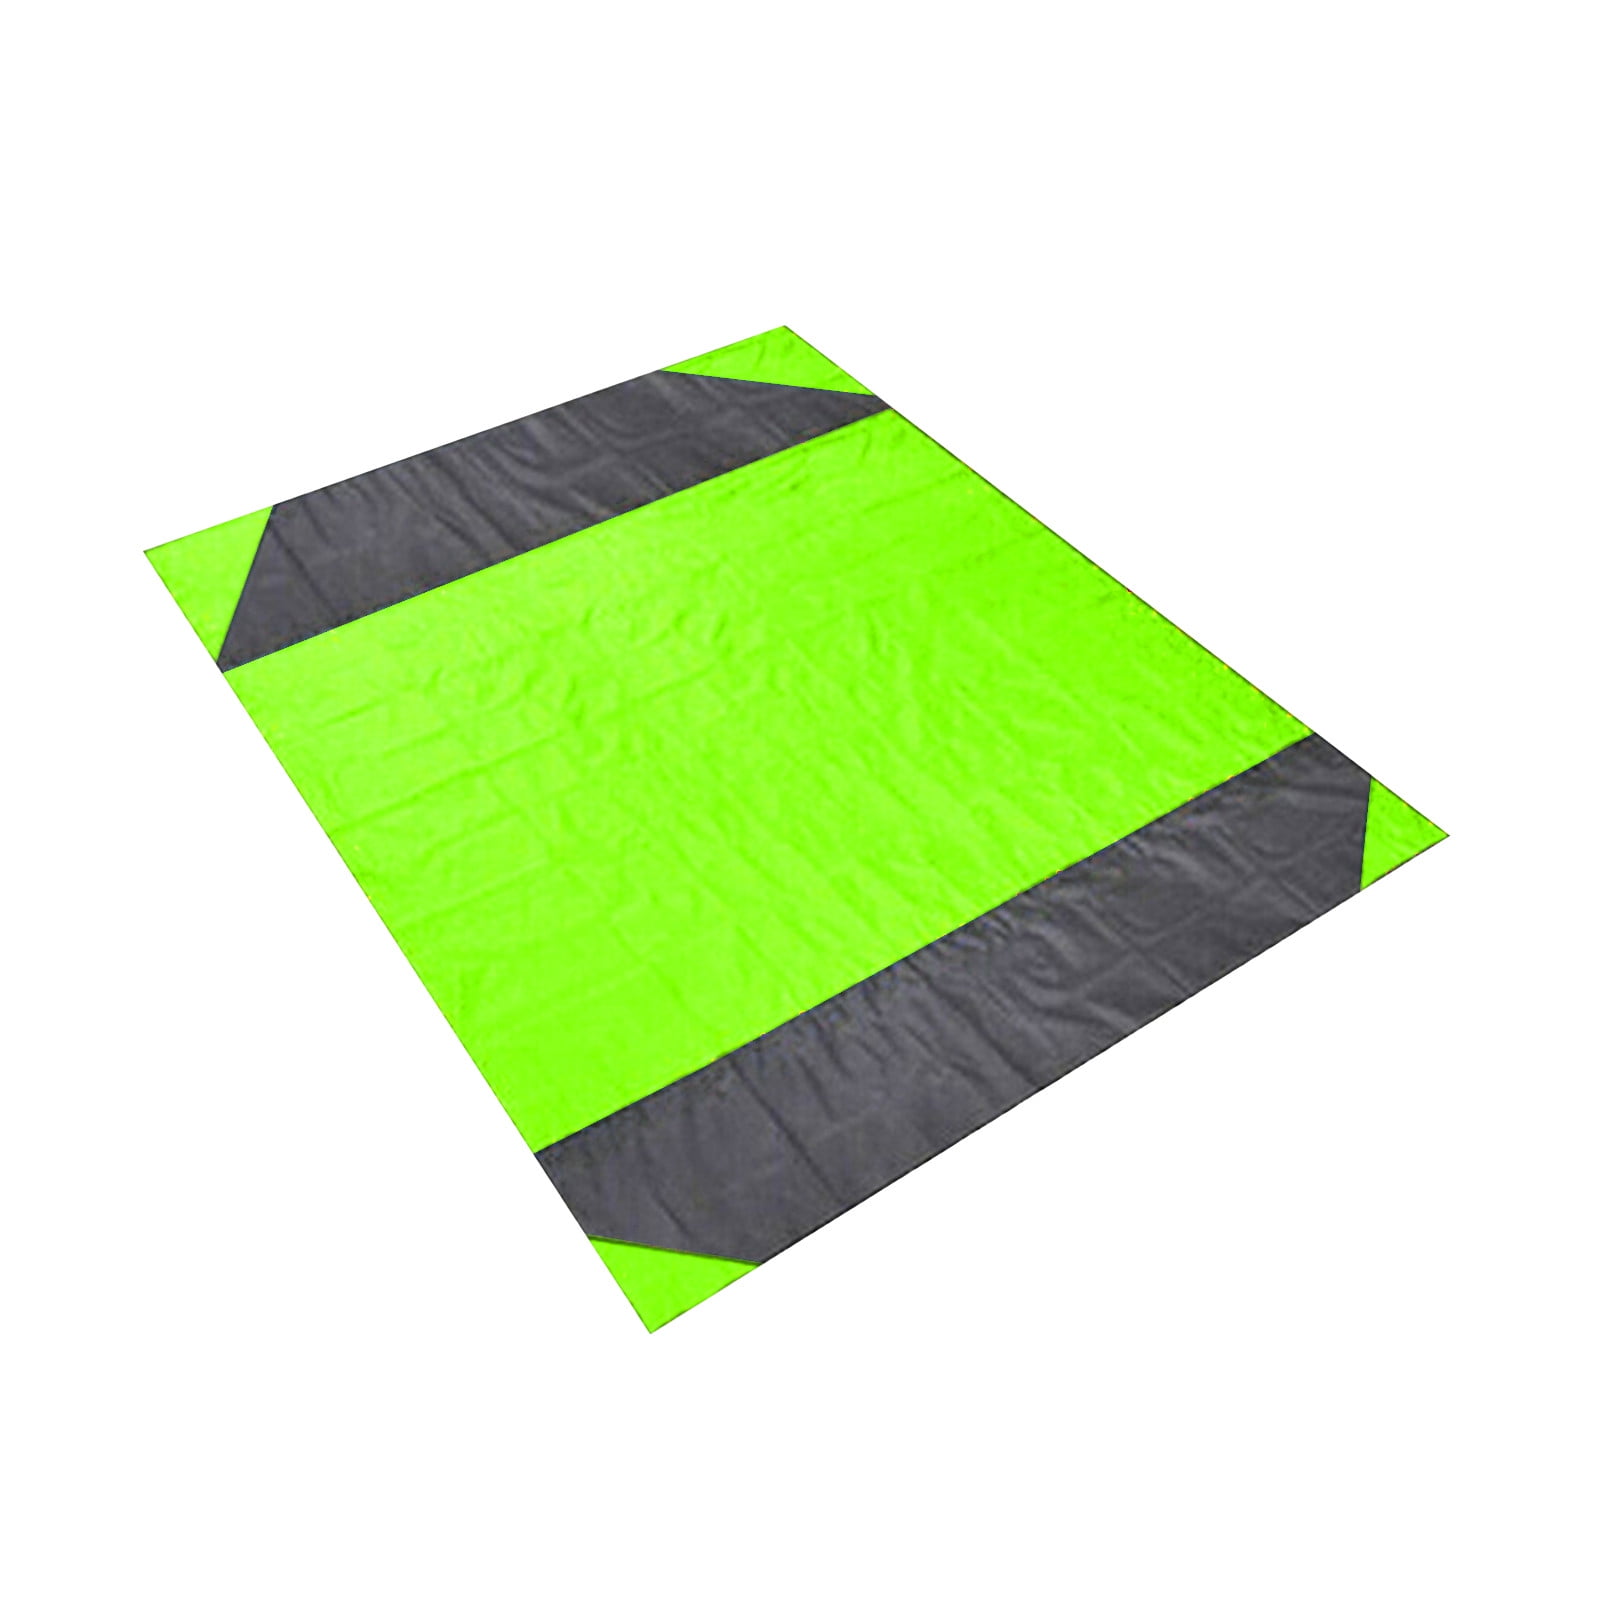 Details about   Folding Beach Blanket Waterproof Camping Picnic Mats Portable Travel Pocket Pad 